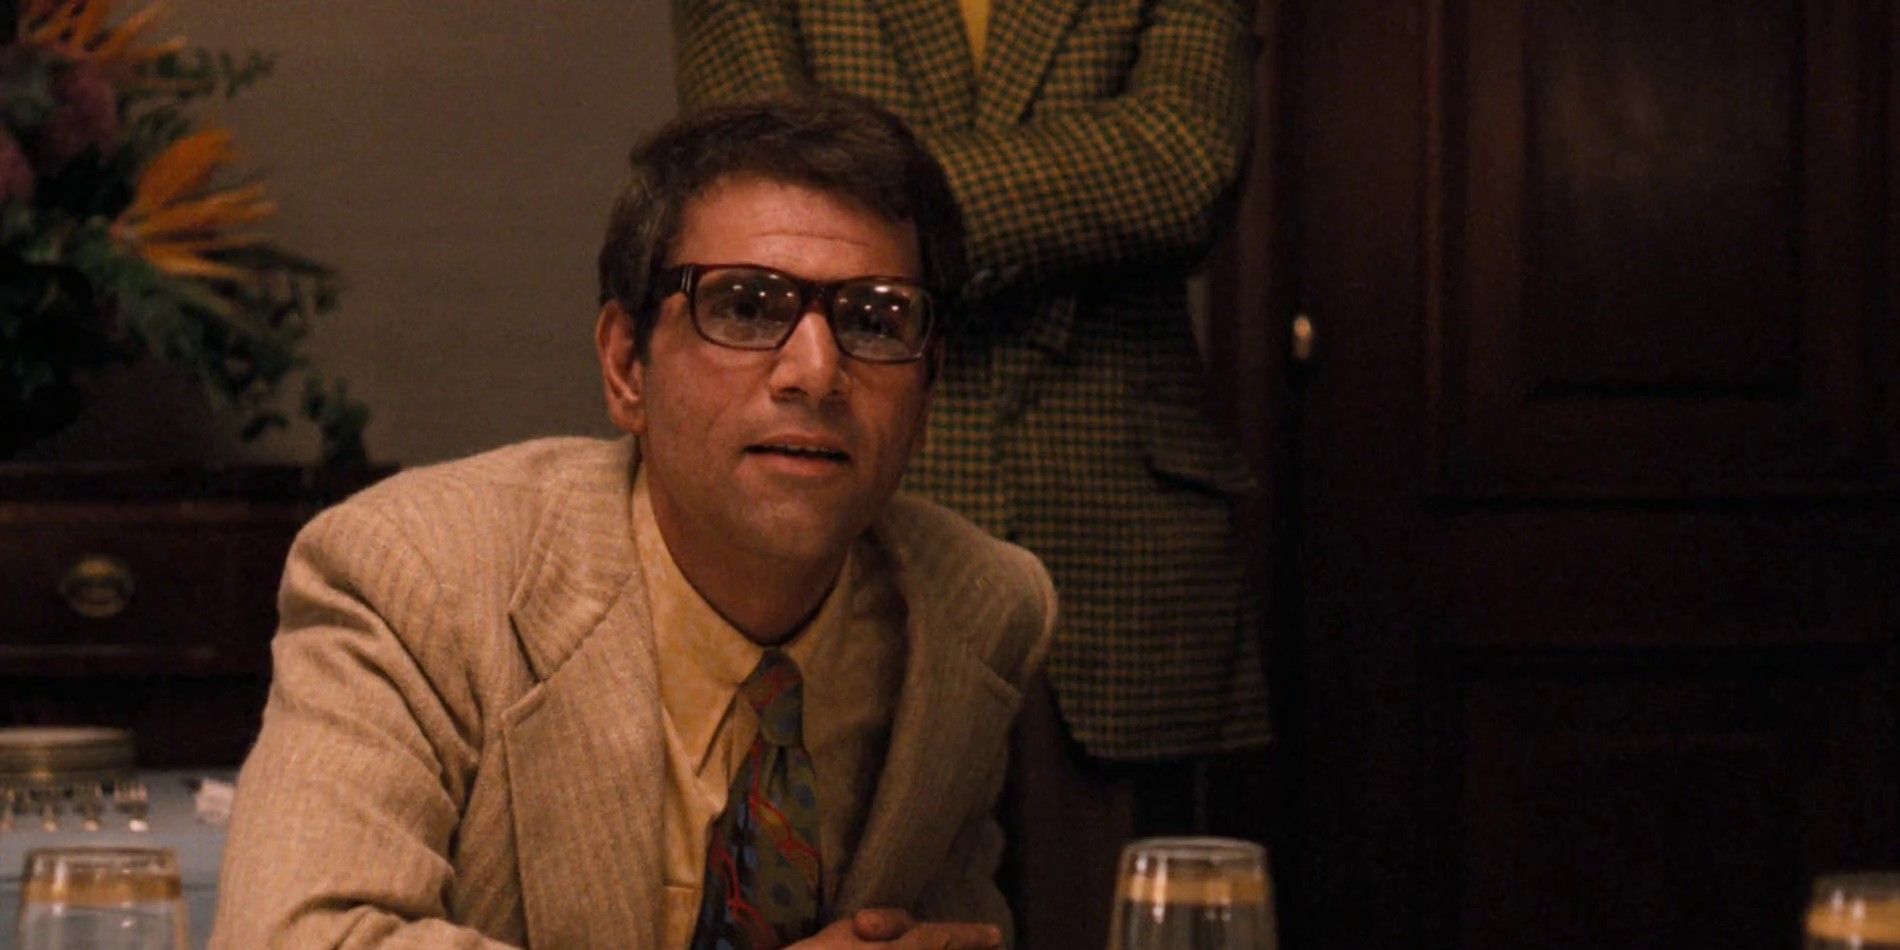 Moe Greene meets Michael for the first time in The Godfather